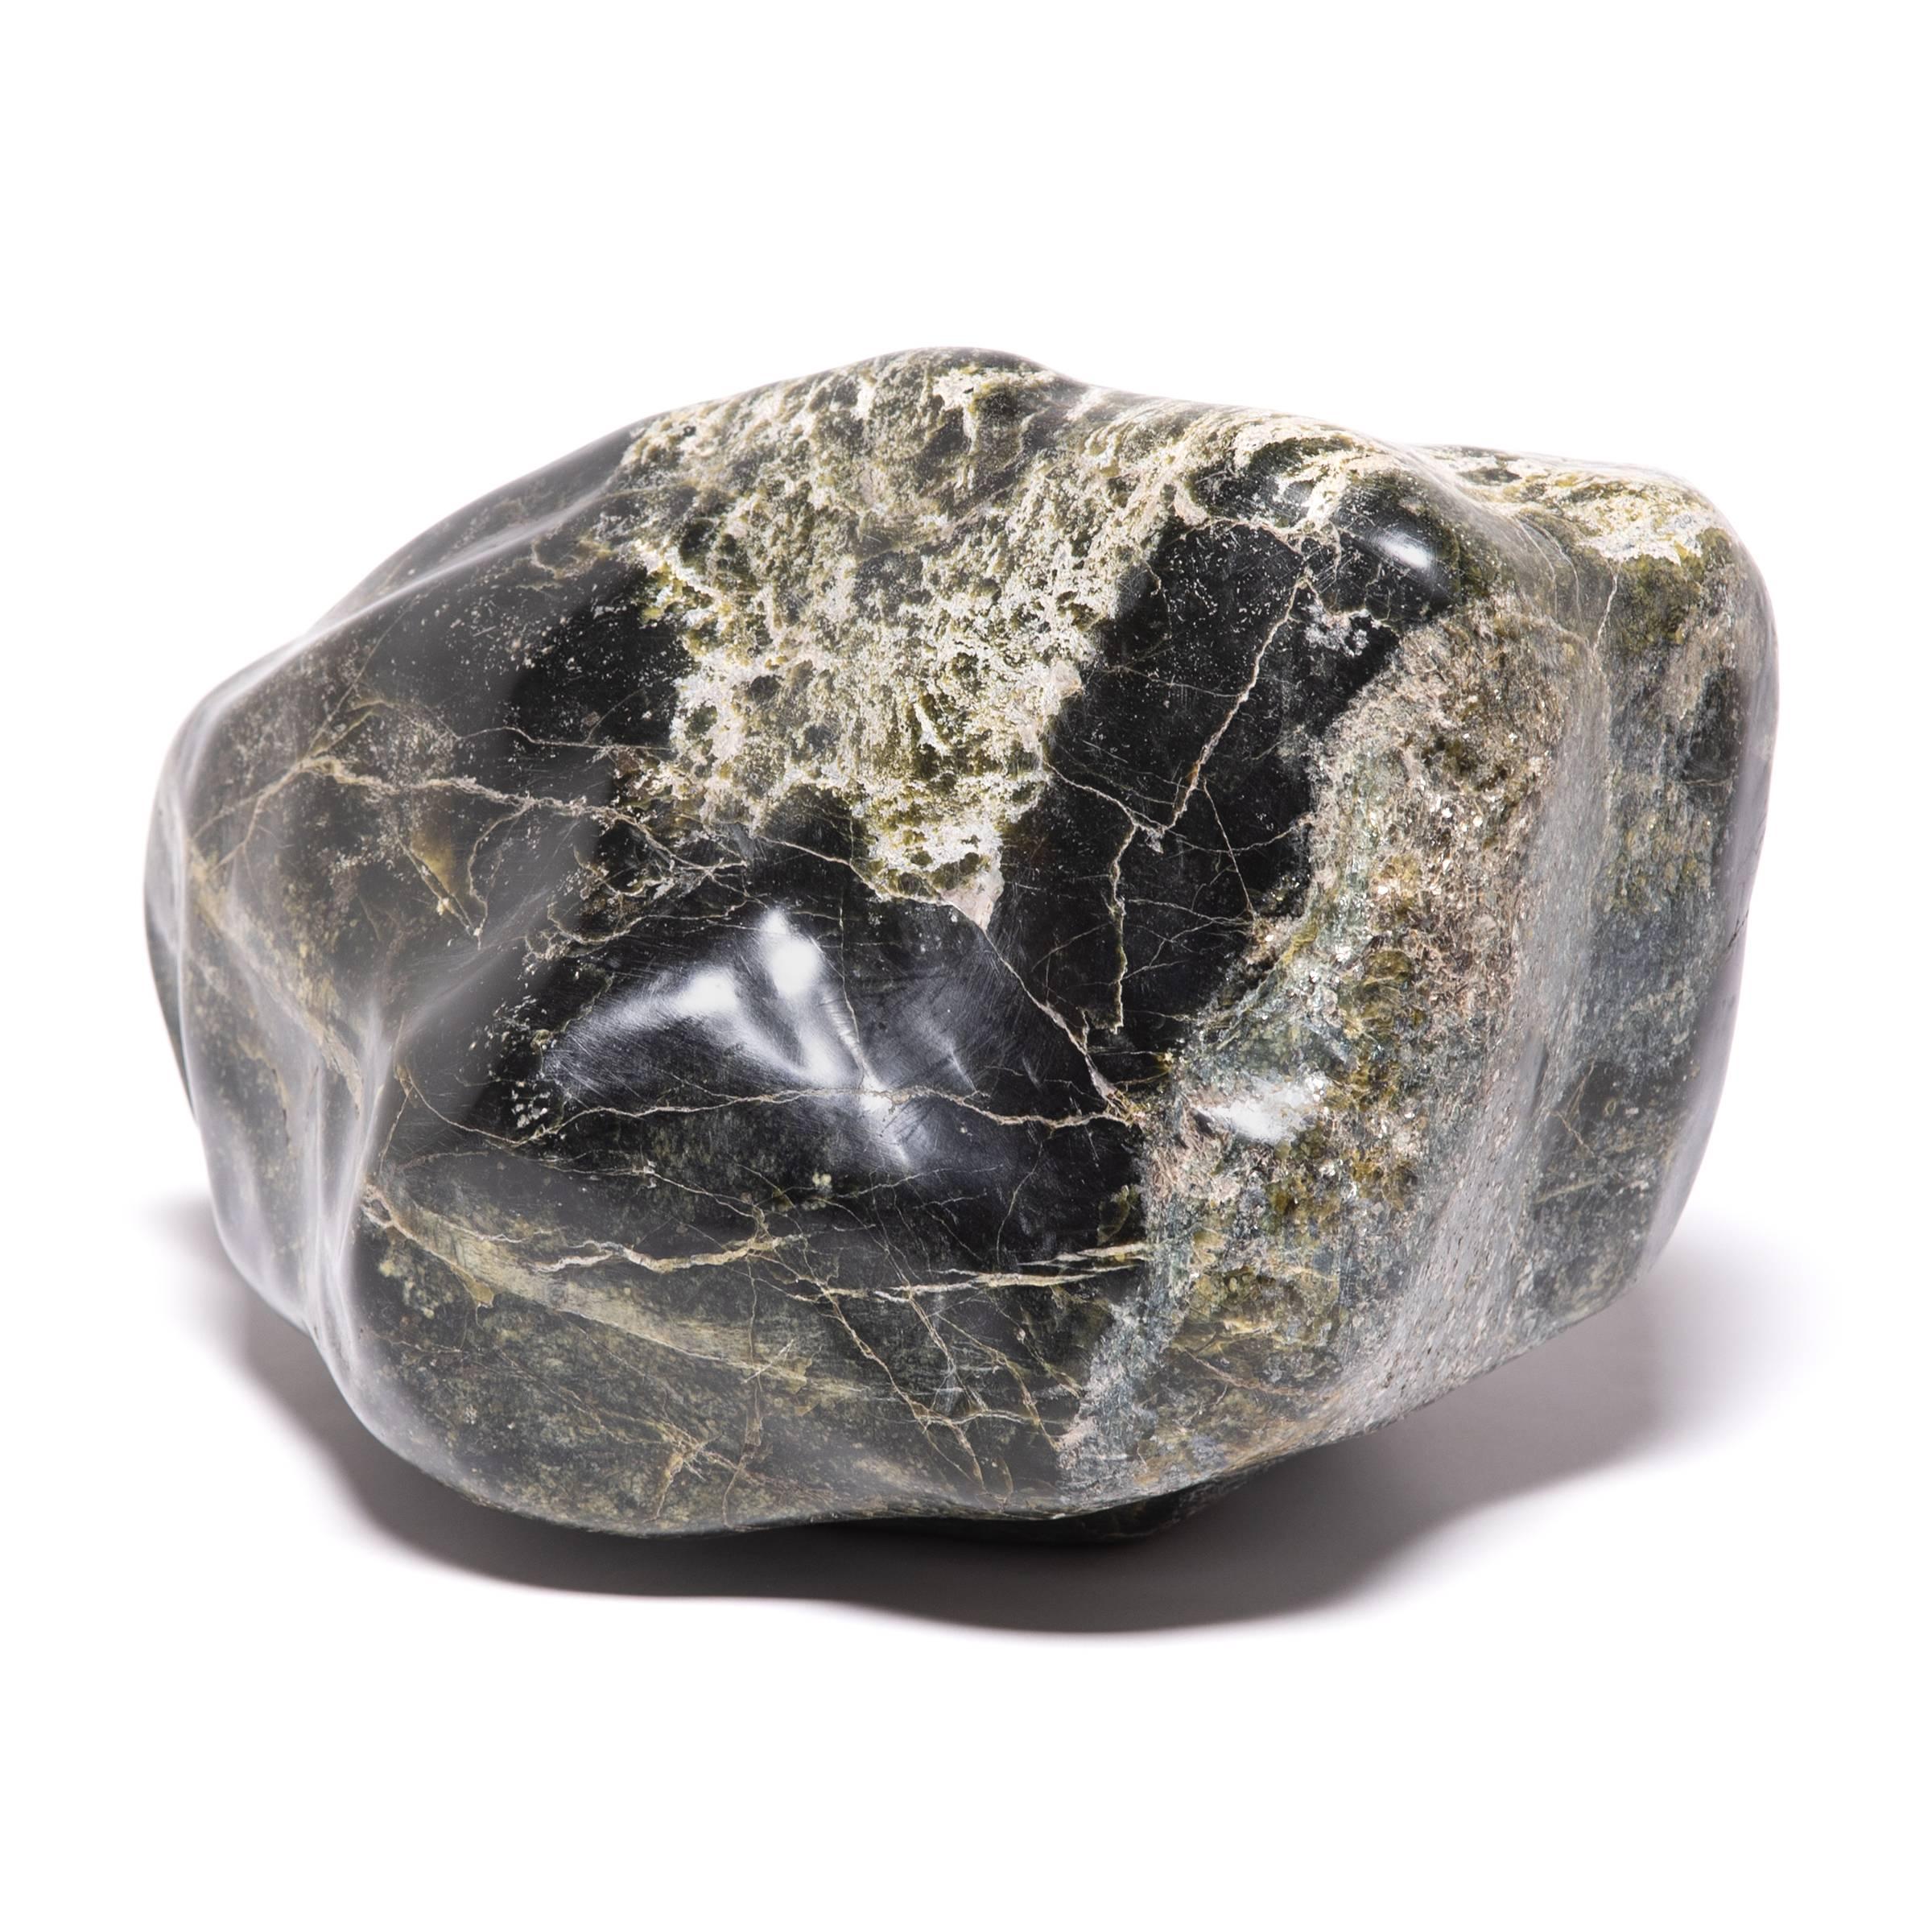 A well-chosen stone is a focal point of both a traditional Chinese garden and a scholar's studio, evoking the grandeur of nature and inspiring creative thought. Meditation stones offer the mind a place to focus - not unlike modern abstract art, each